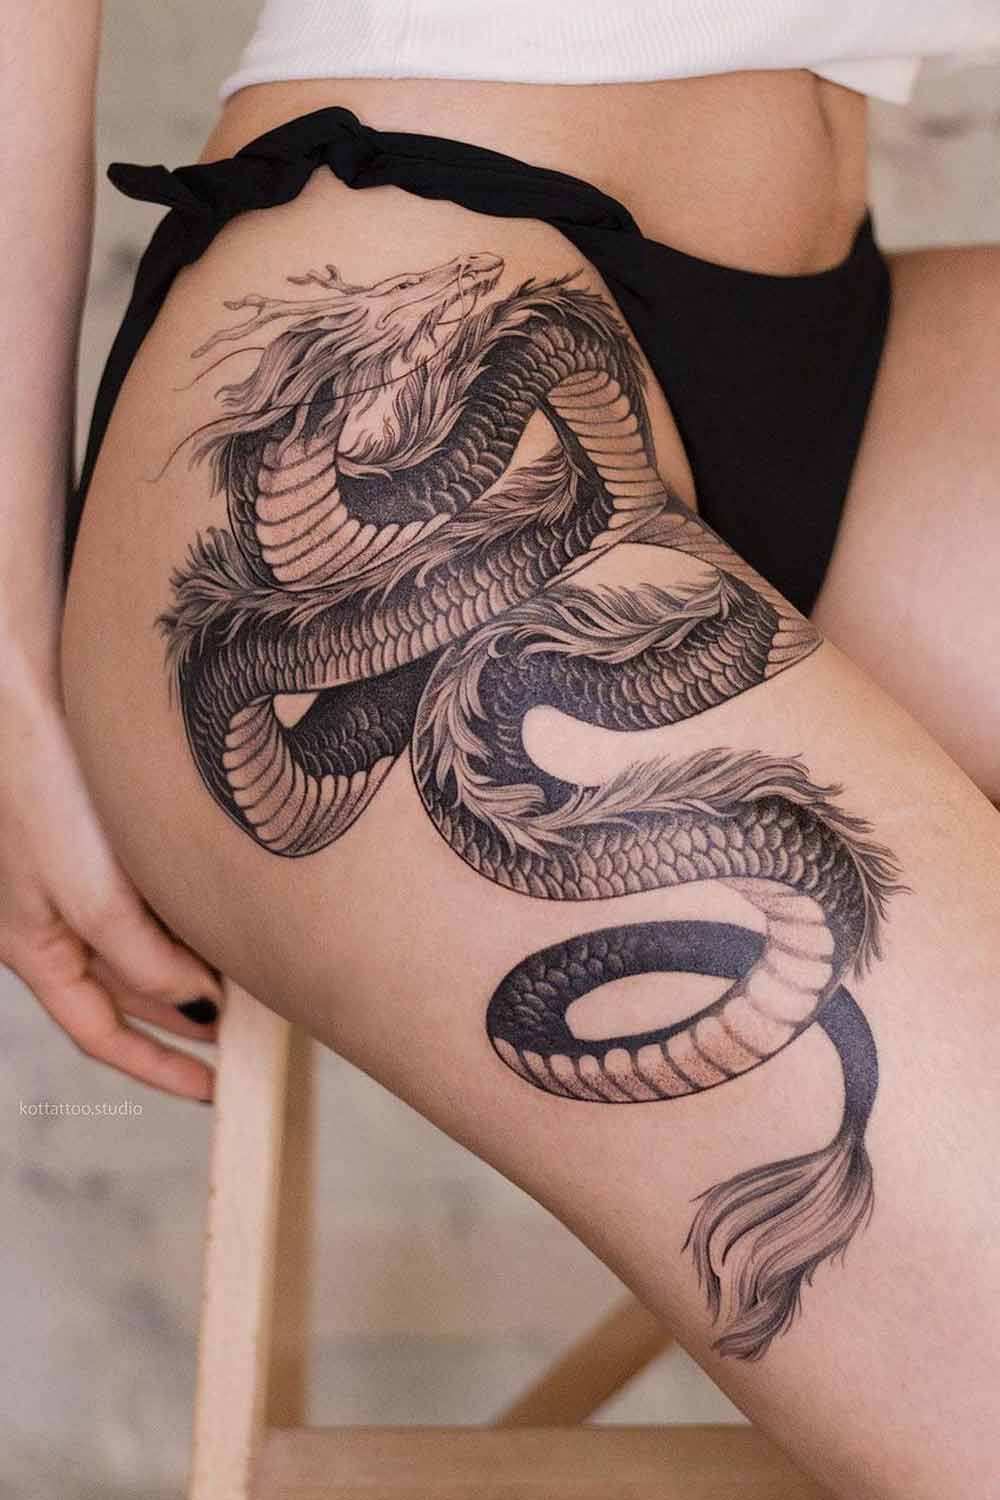 Beautiful Thigh Tattoo with a Dragon